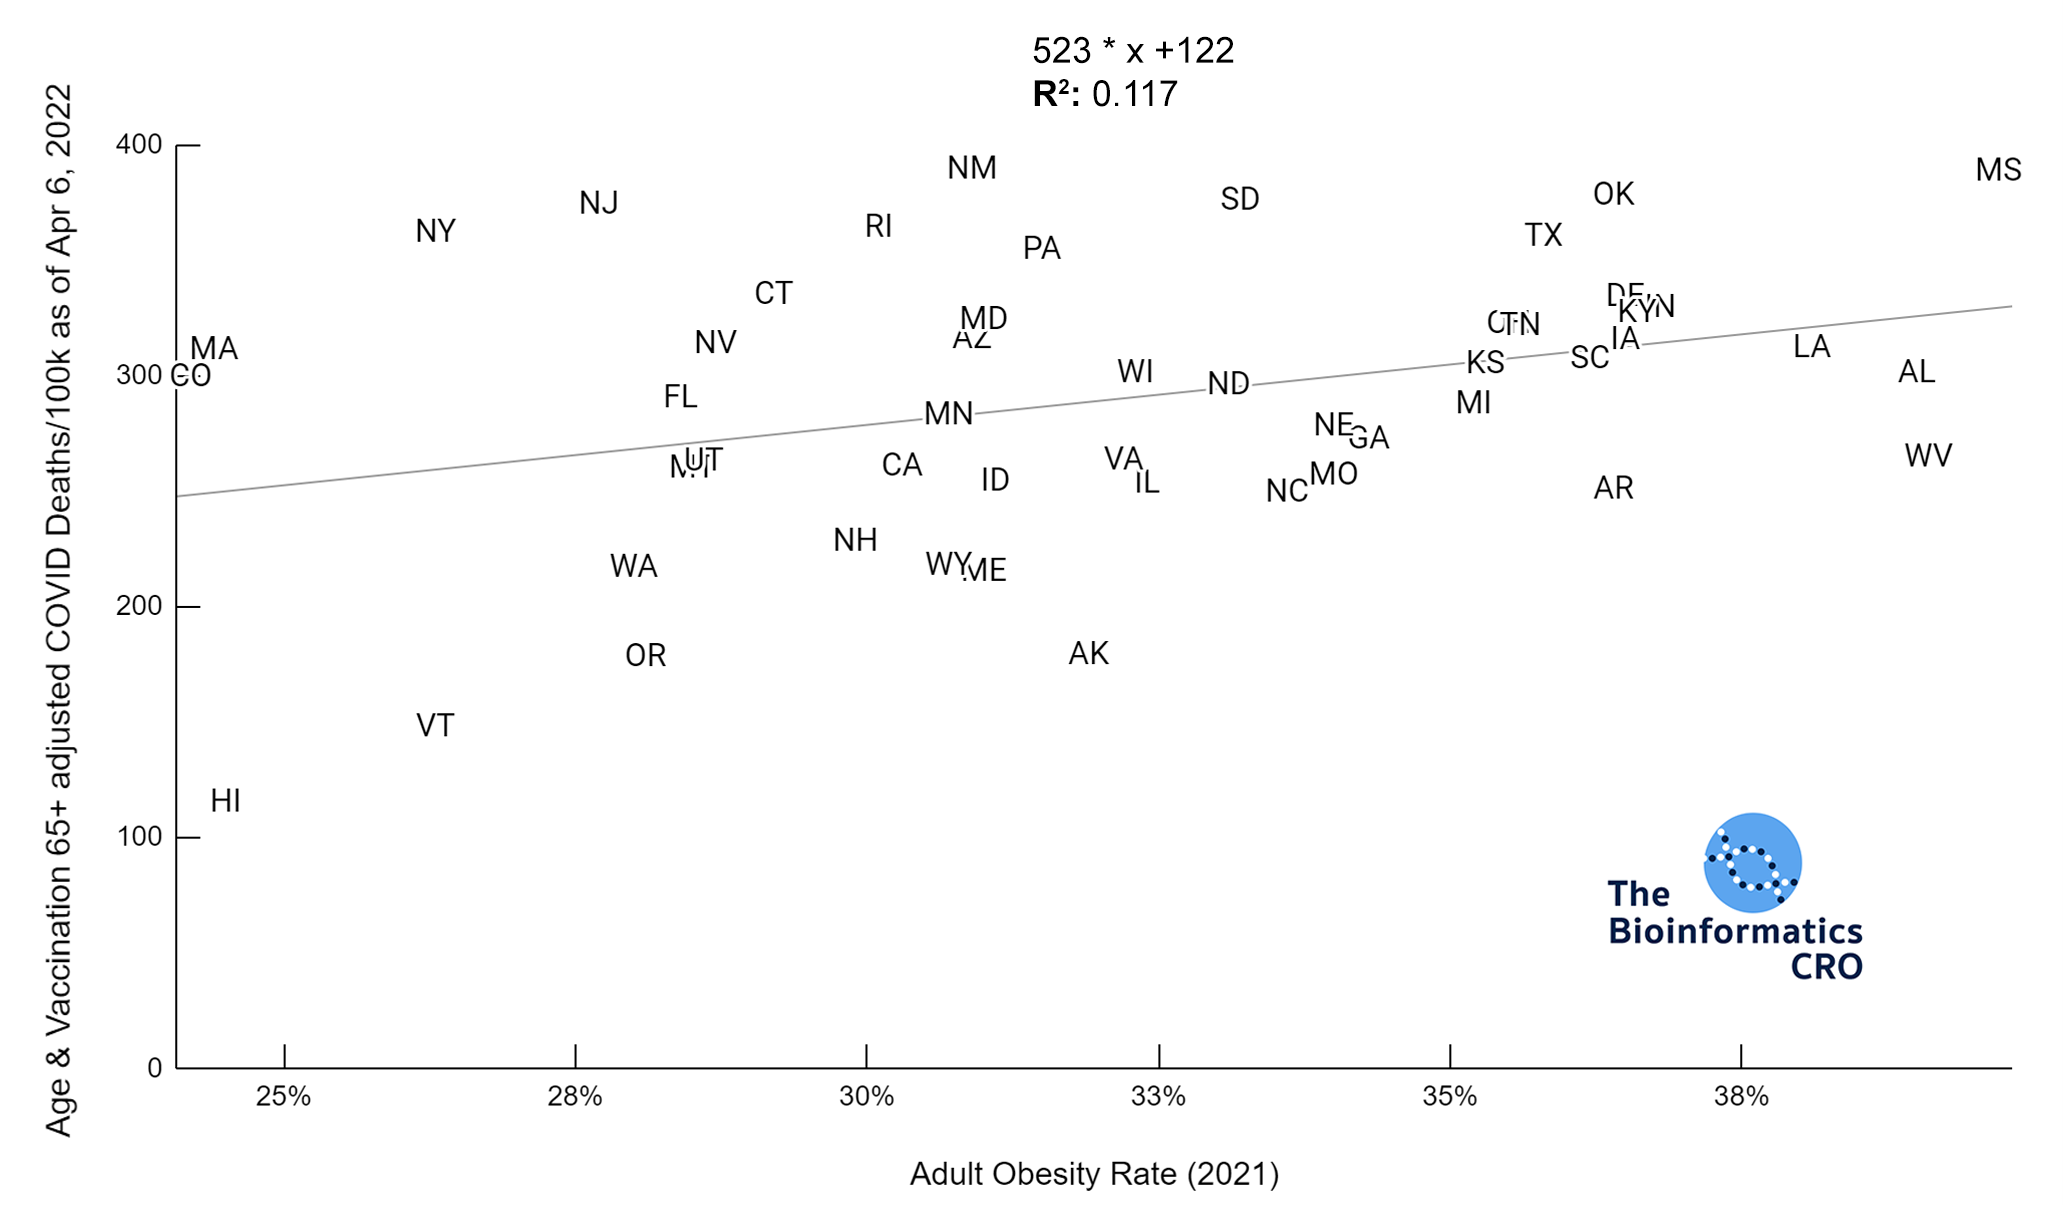 Adult Obesity in 2021 versus Age and Vaccination adjusted COVID deaths | y = 523 * x + 122 | R^2 = 0.117